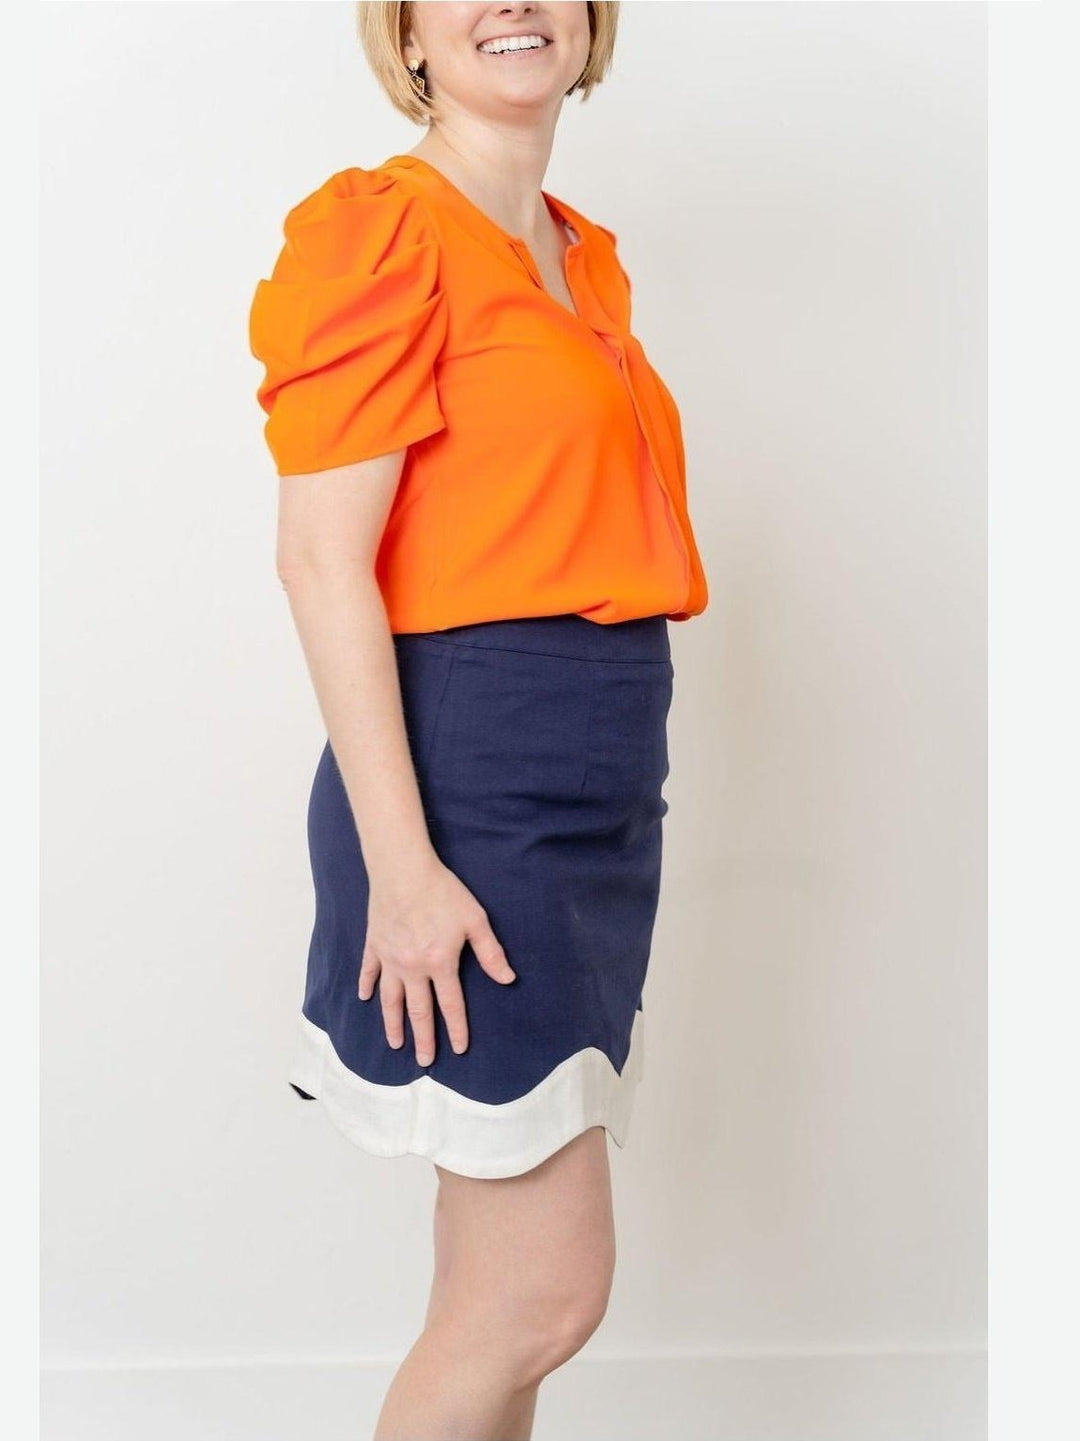 Navy Skirt with White Wave Detail at Bottom - Lolo Viv Boutique